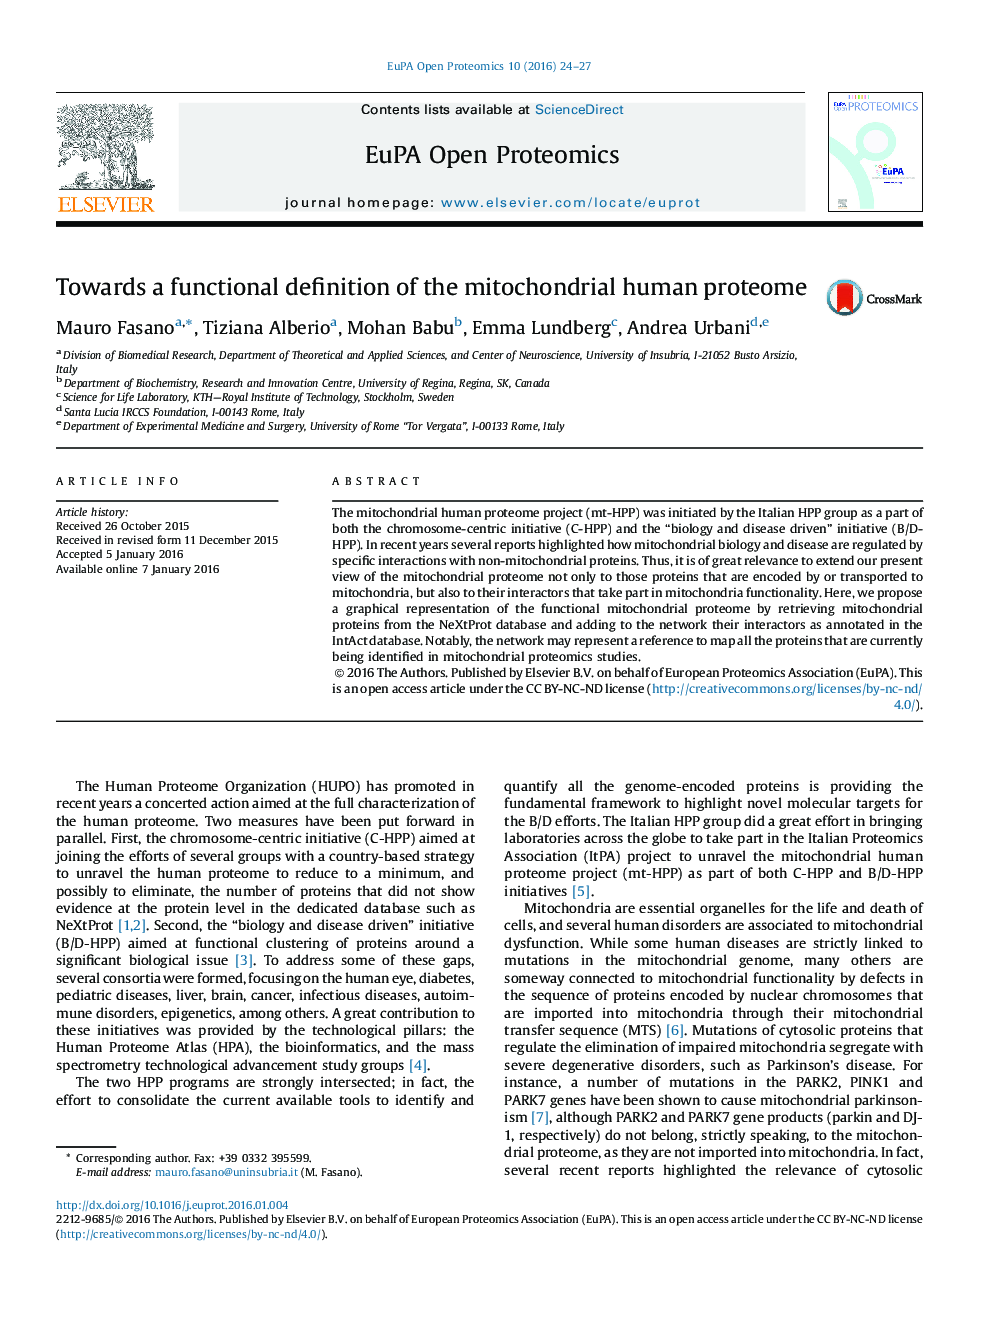 Towards a functional definition of the mitochondrial human proteome